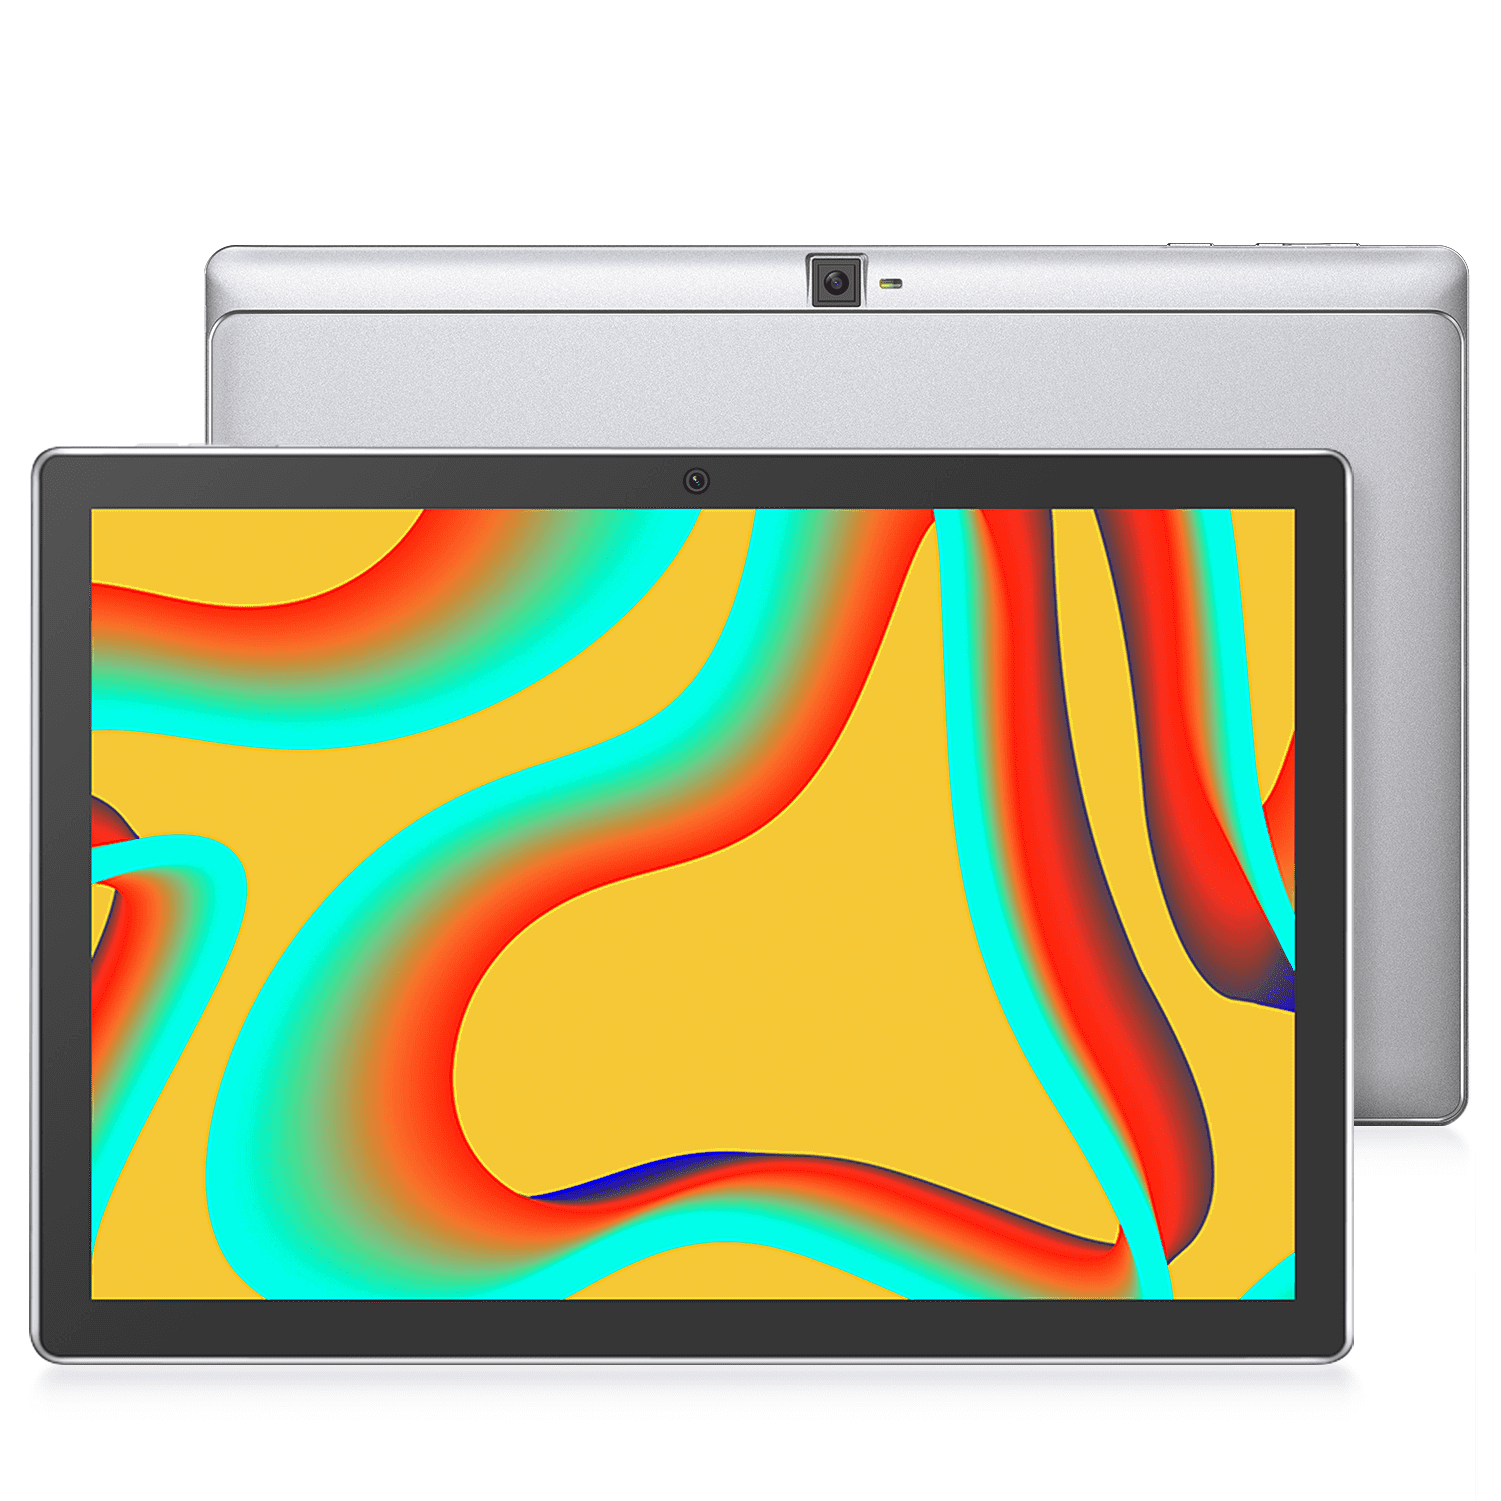 VANKYO MatrixPad S30 10 inch Tablet, Octa-Core, Come With Screen Protector,  Android 9.0 Pie, 3GB RAM, 32GB Storage, 13MP Rear Camera, 1920x1200 IPS